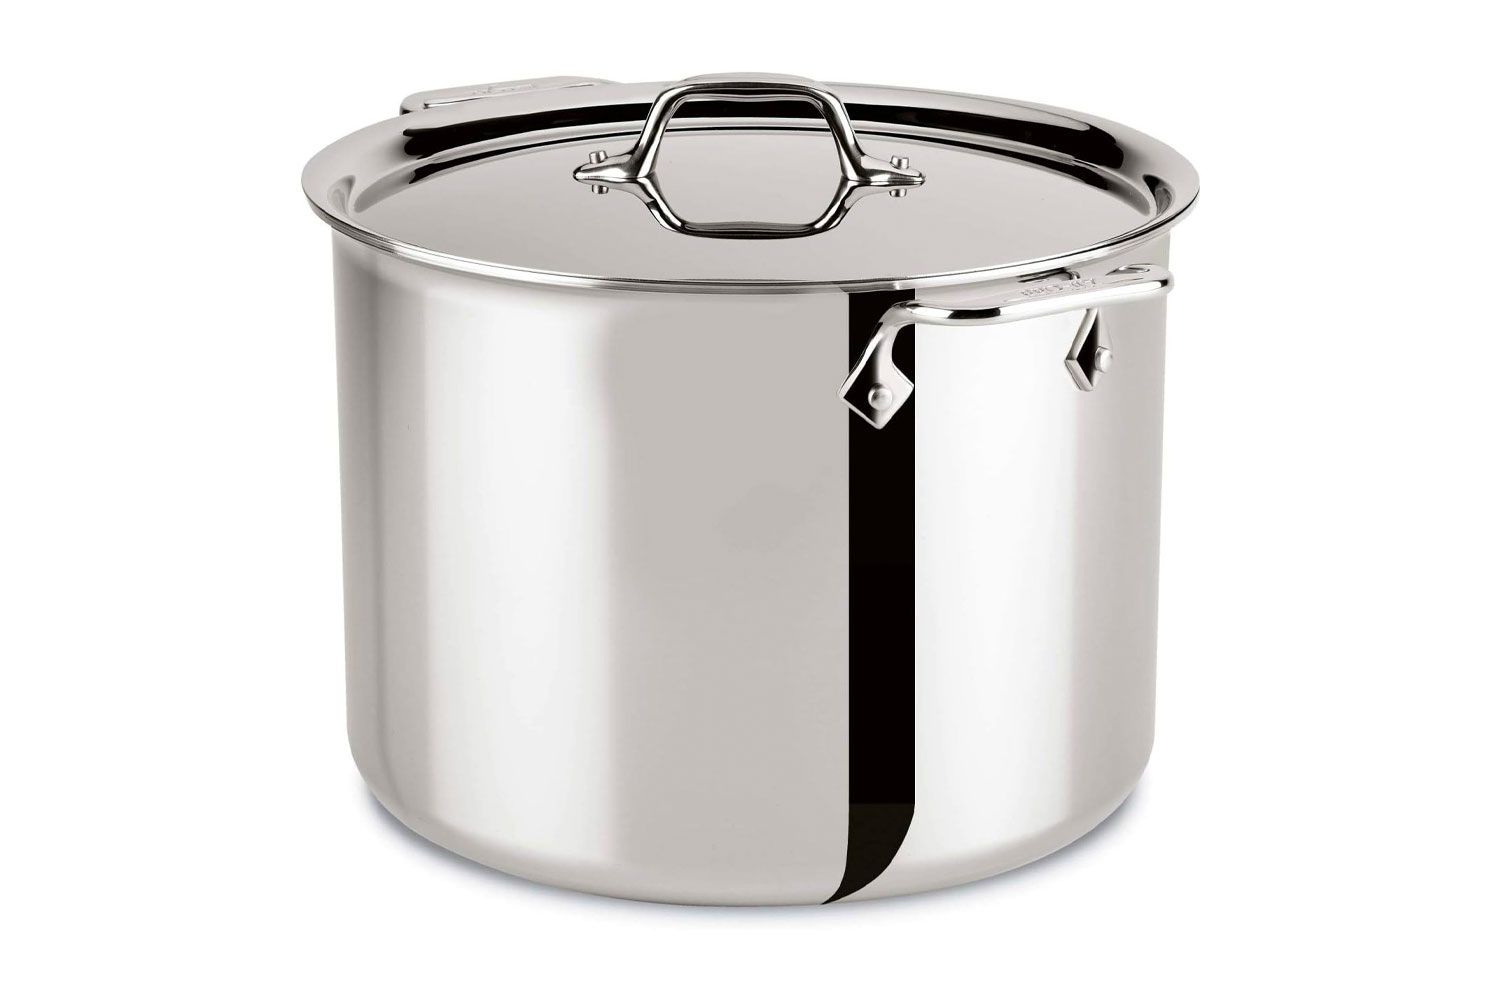 All-Clad D3 Stainless Steel 12-Quart Covered Stock Pot